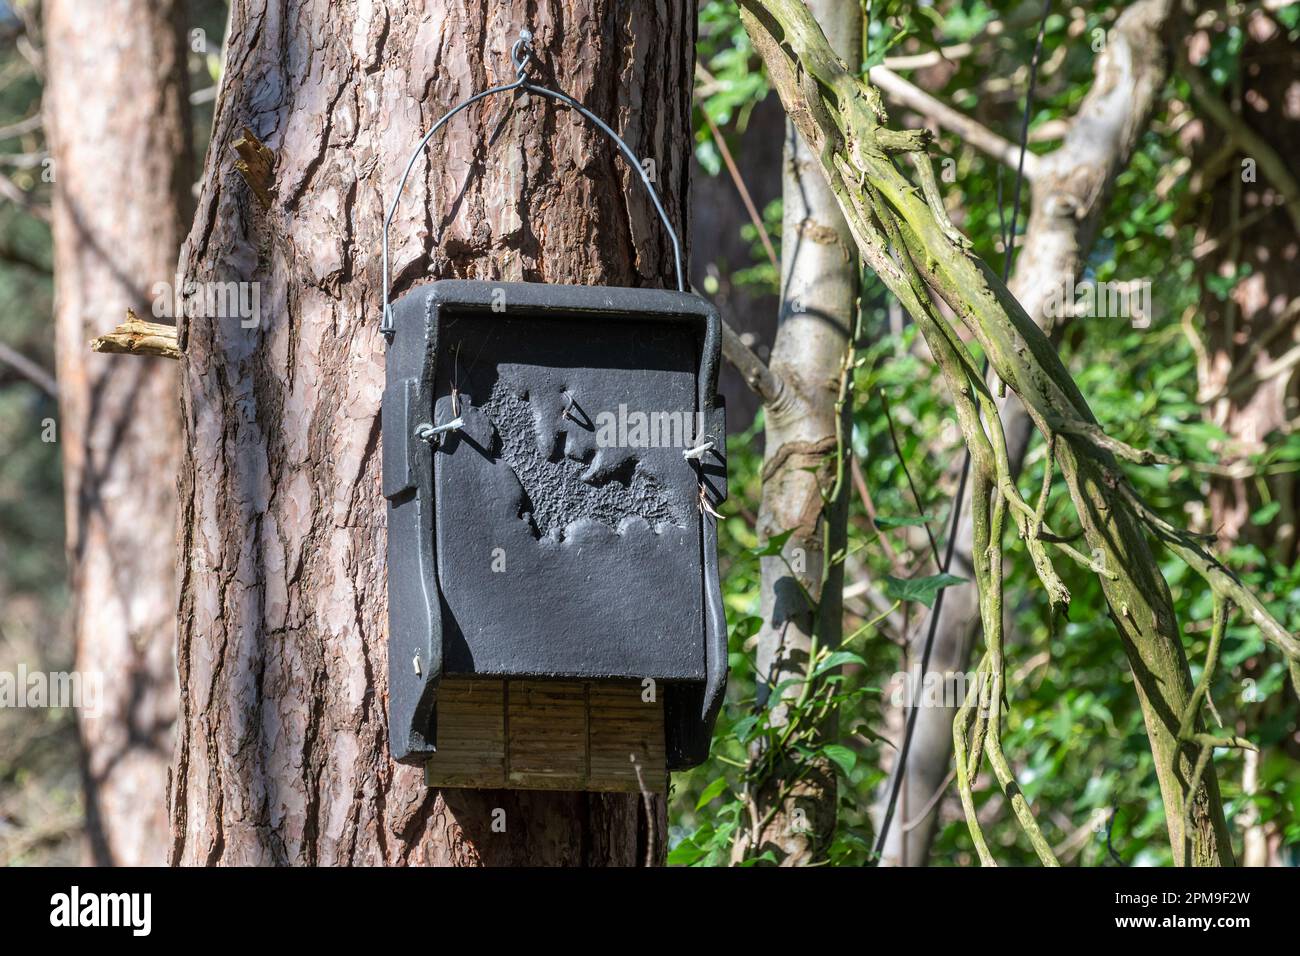 Large rectangular black bat box on a pine tree, crevice bat box for roosting bats in a forest, England, UK Stock Photo